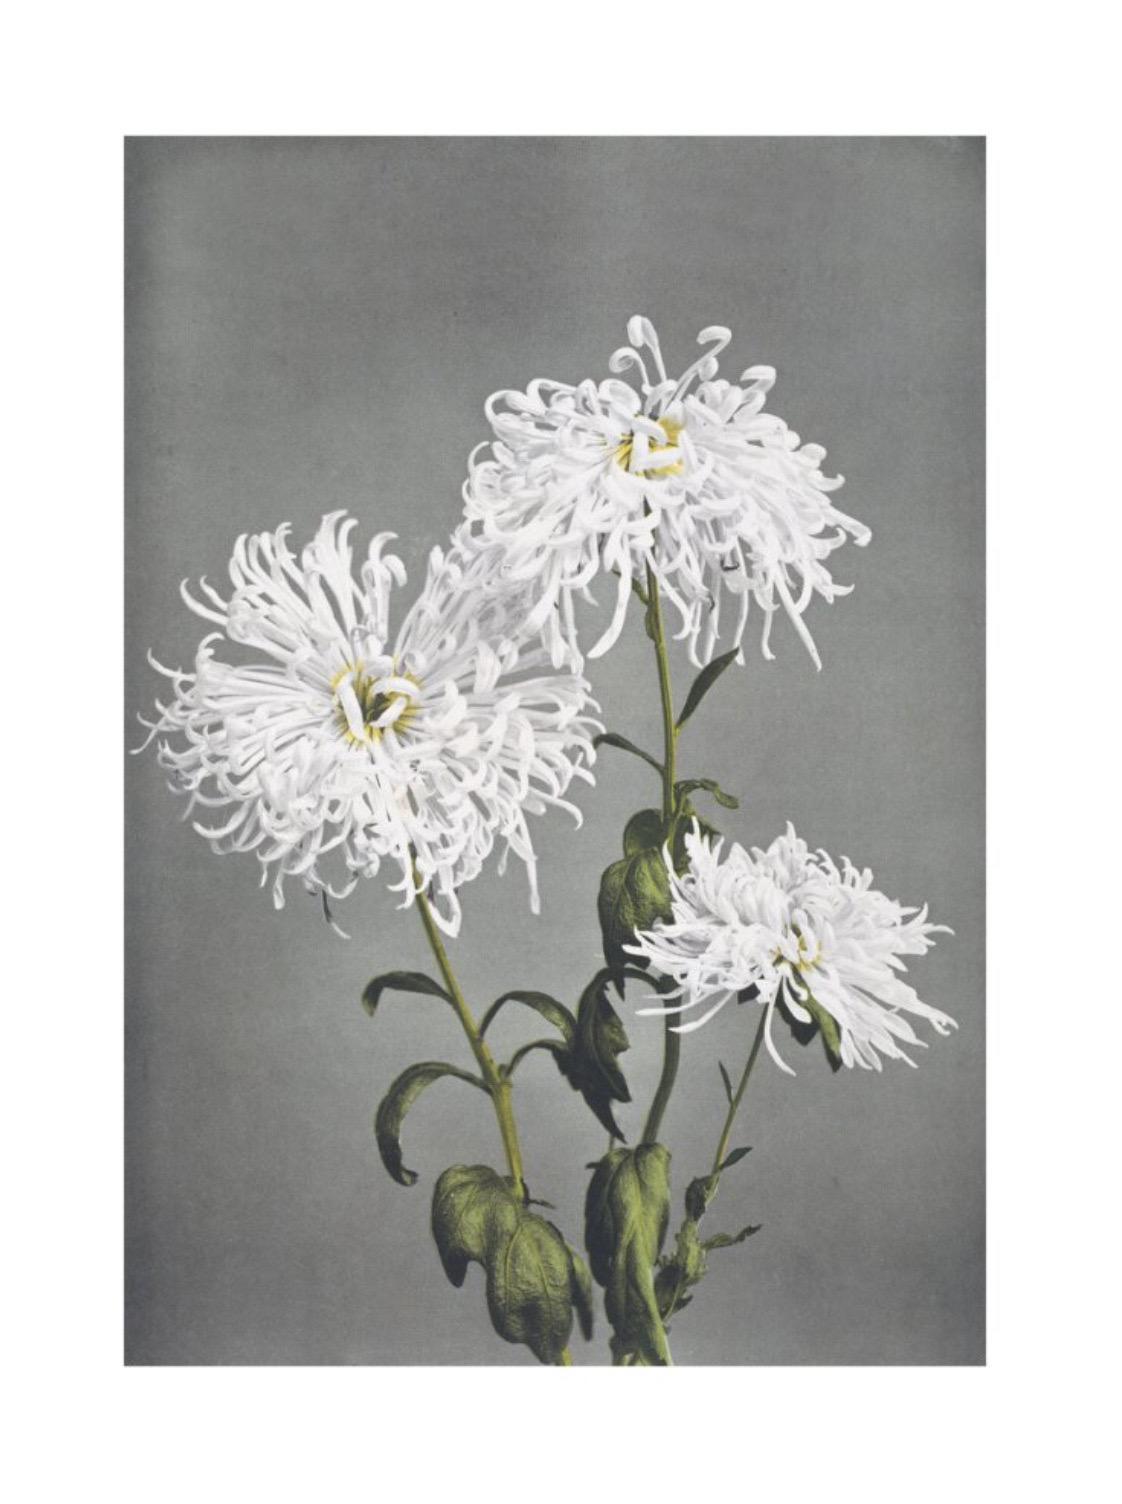 Ogawa Kazumasa, Chrysanthemum, from Some Japanese Flowers

Giclee print on Matt 250gsm conservation paper made in Germany from acid and chlorine free wood pulp 

Paper size: 100 x 73 cm 
Image size: 90 x 63 cm 

This print comes with a border